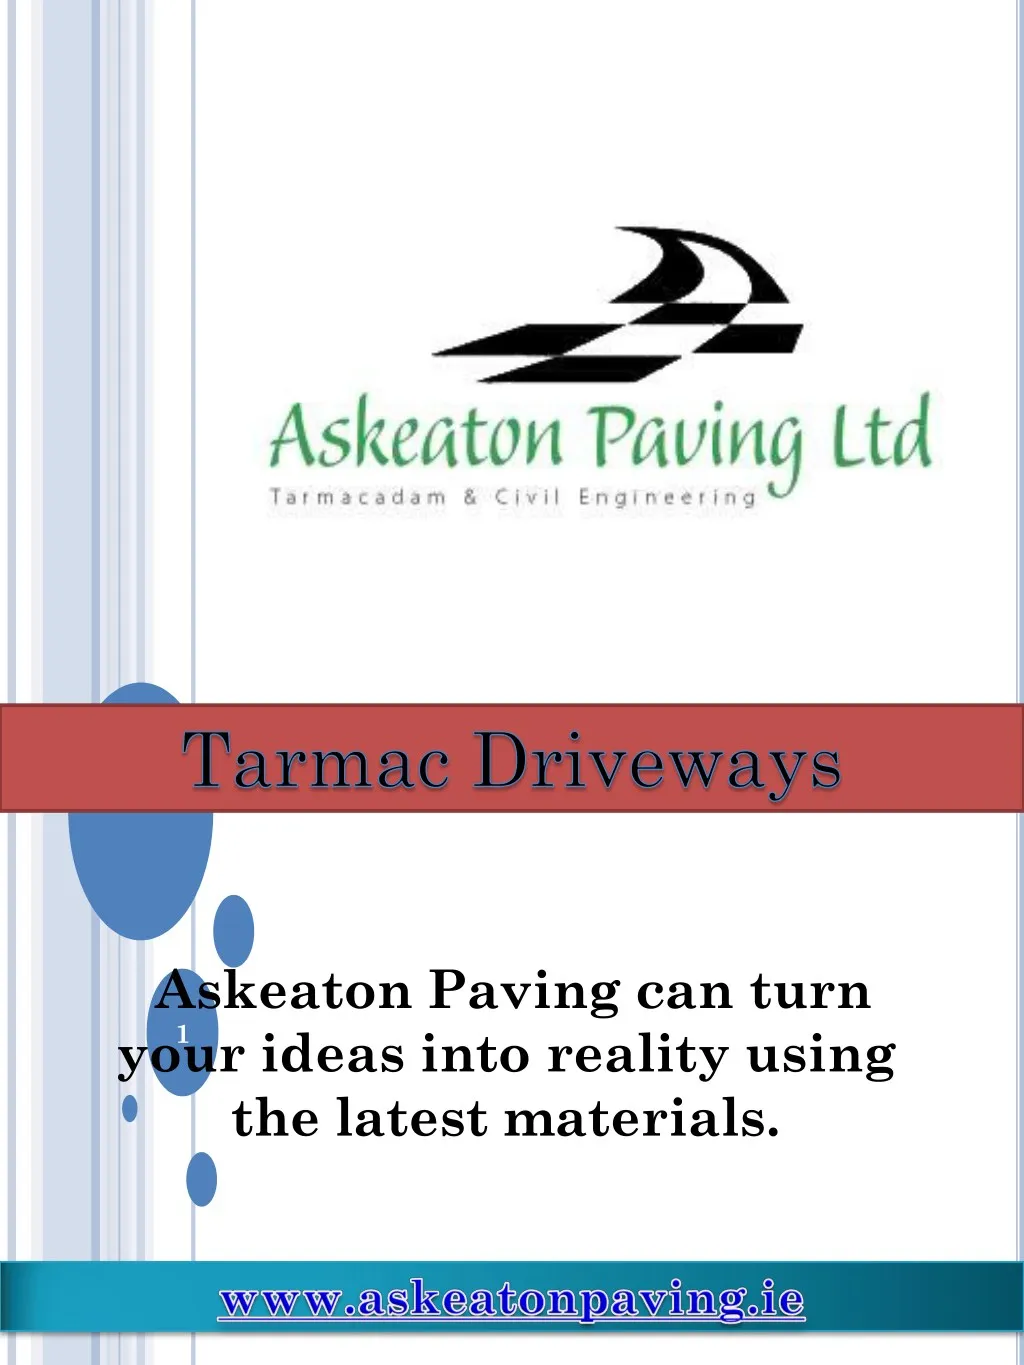 askeaton paving can turn your ideas into reality